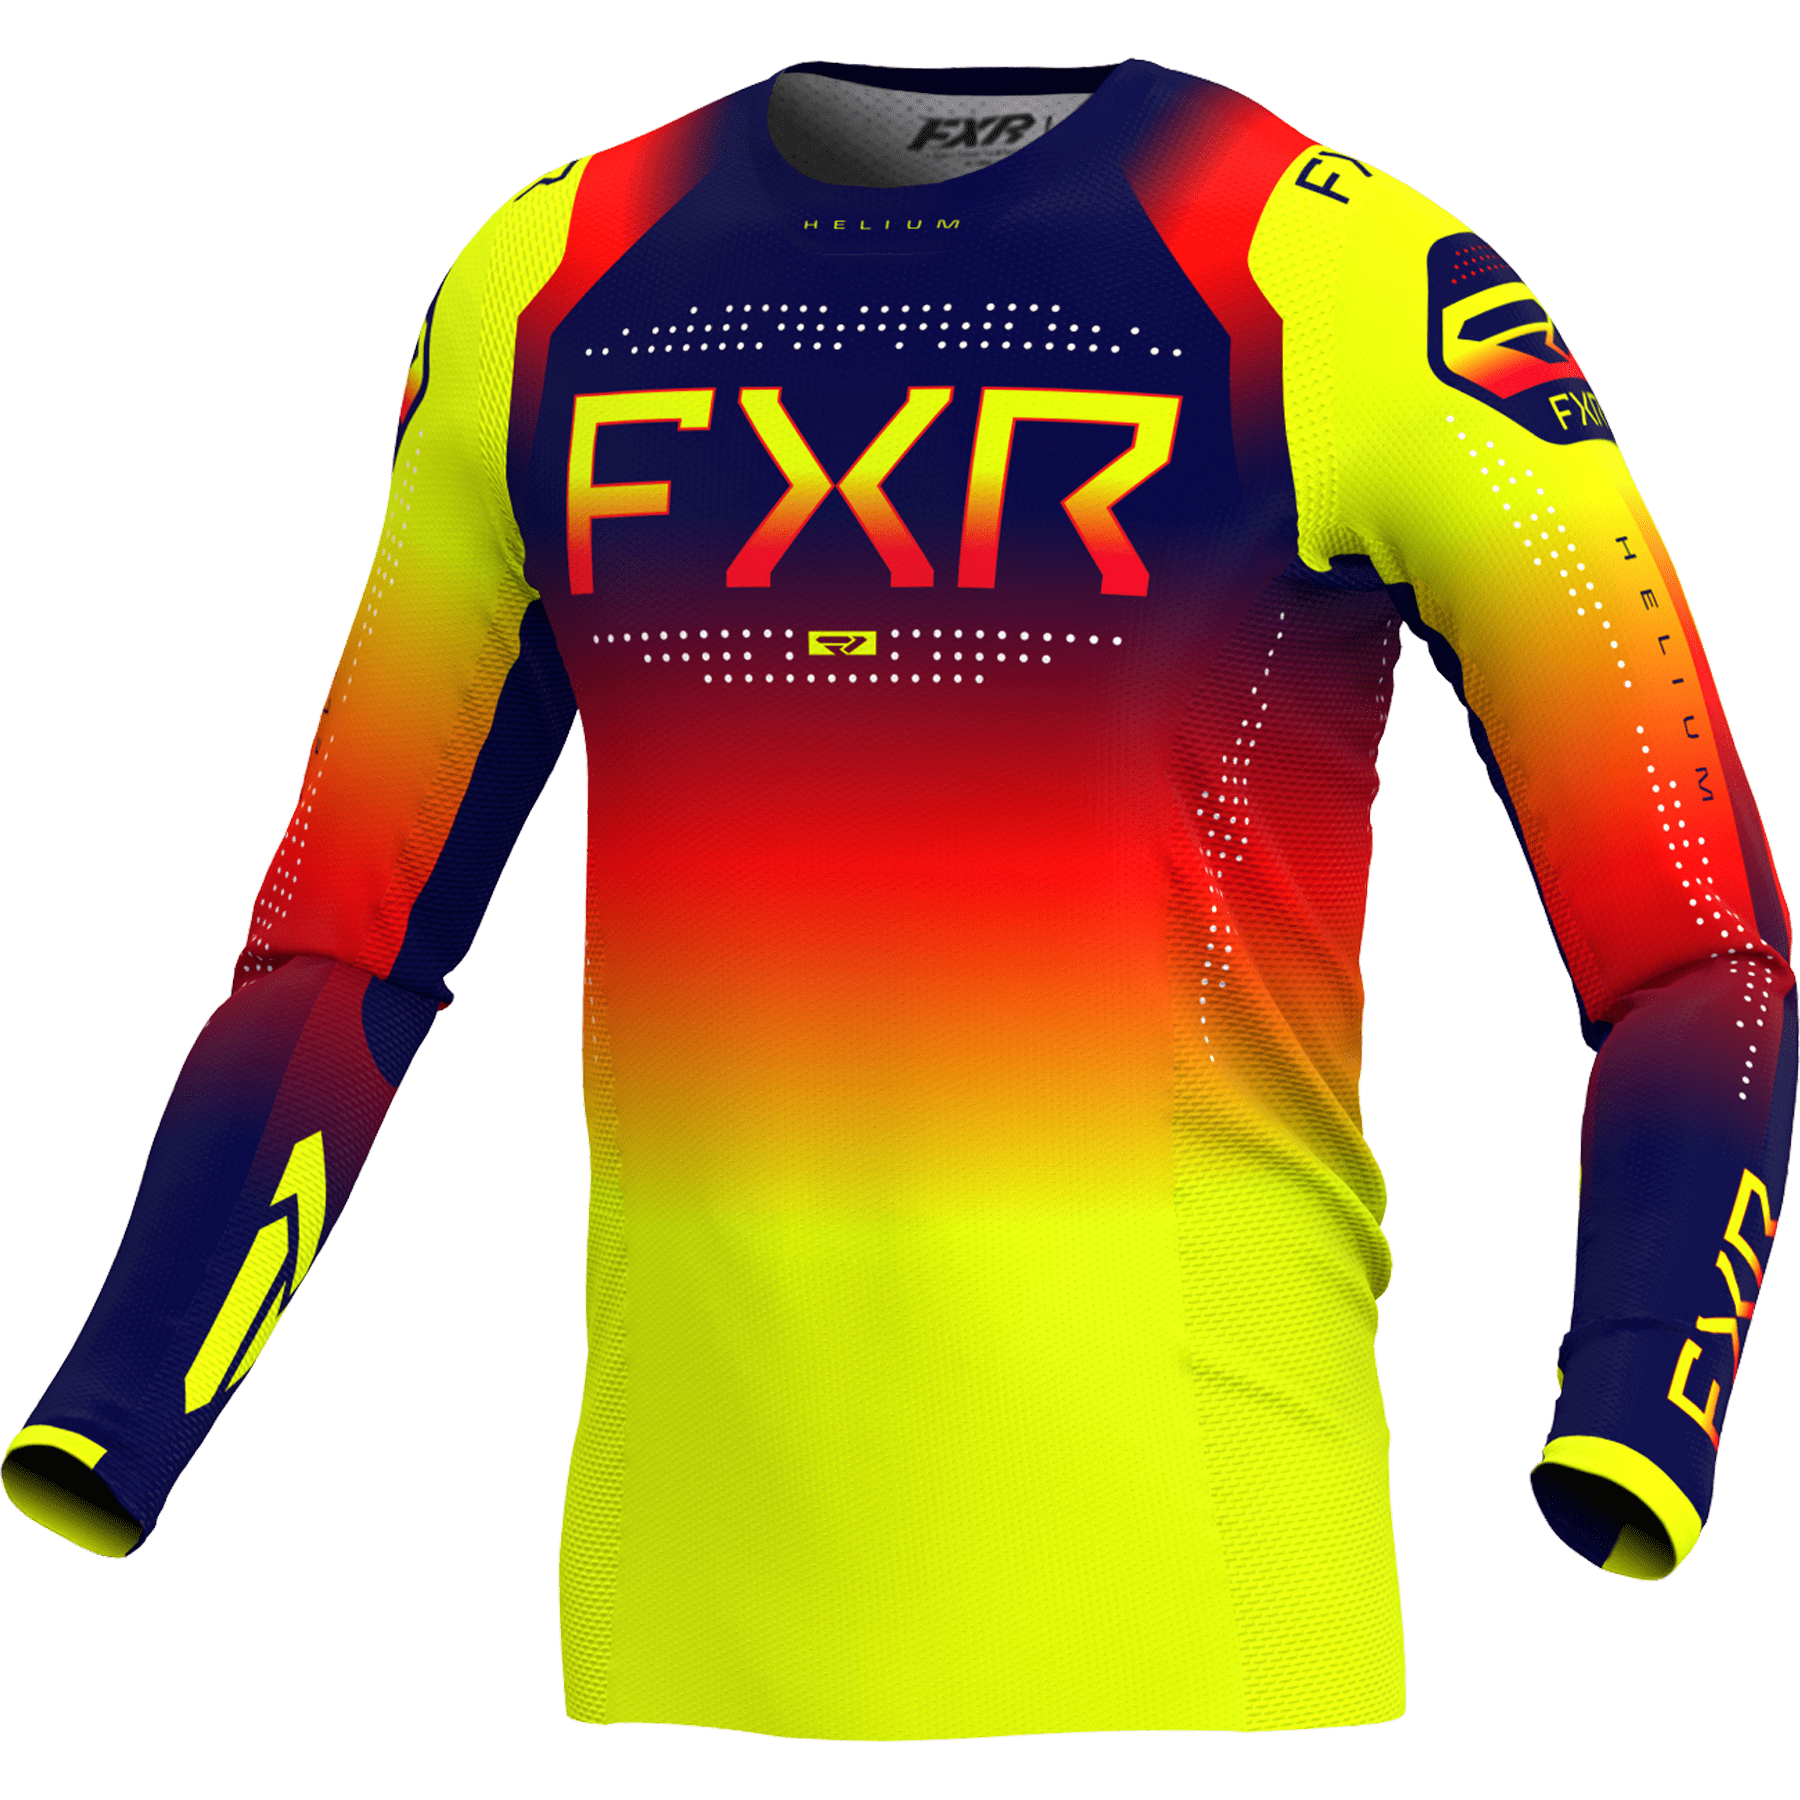 MAILLOT_FXR_Helium_MXJersey_Flare__front